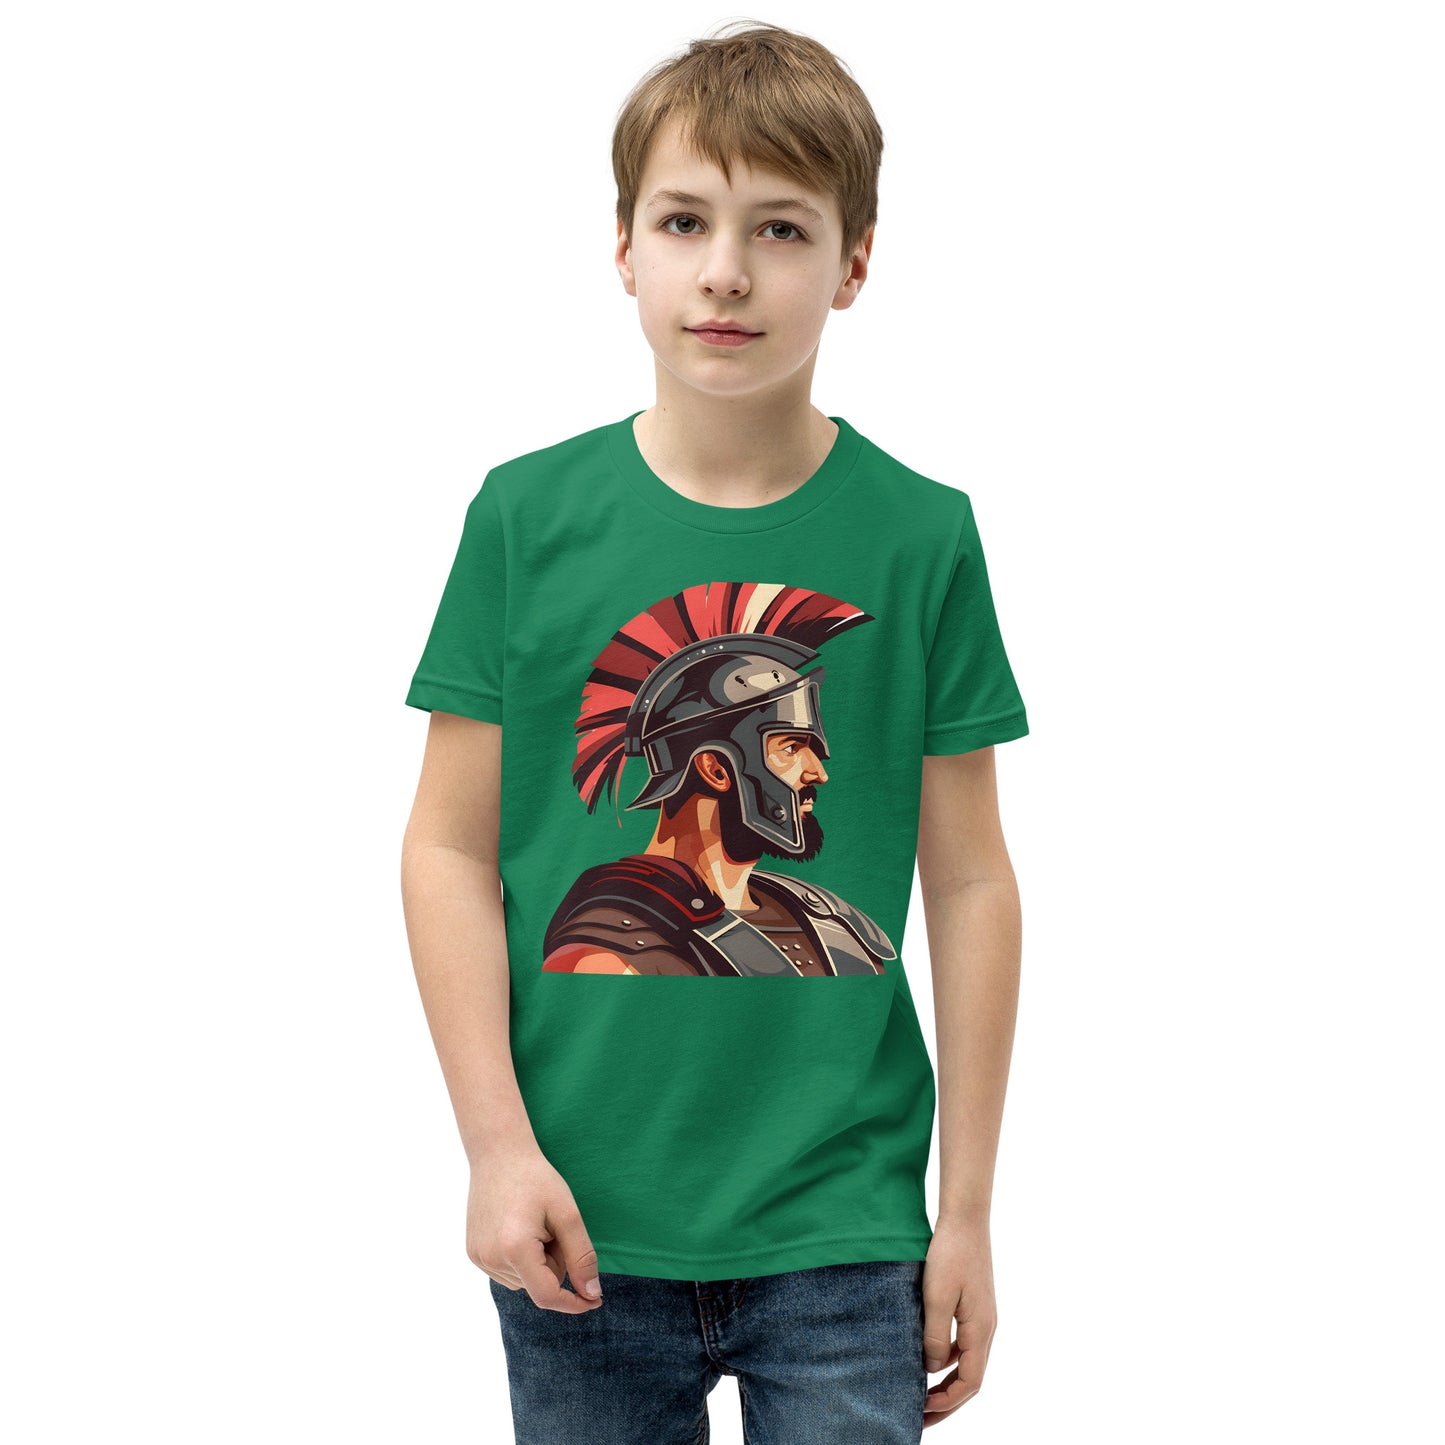 Teenager with a green T-shirt with a print of a warrior